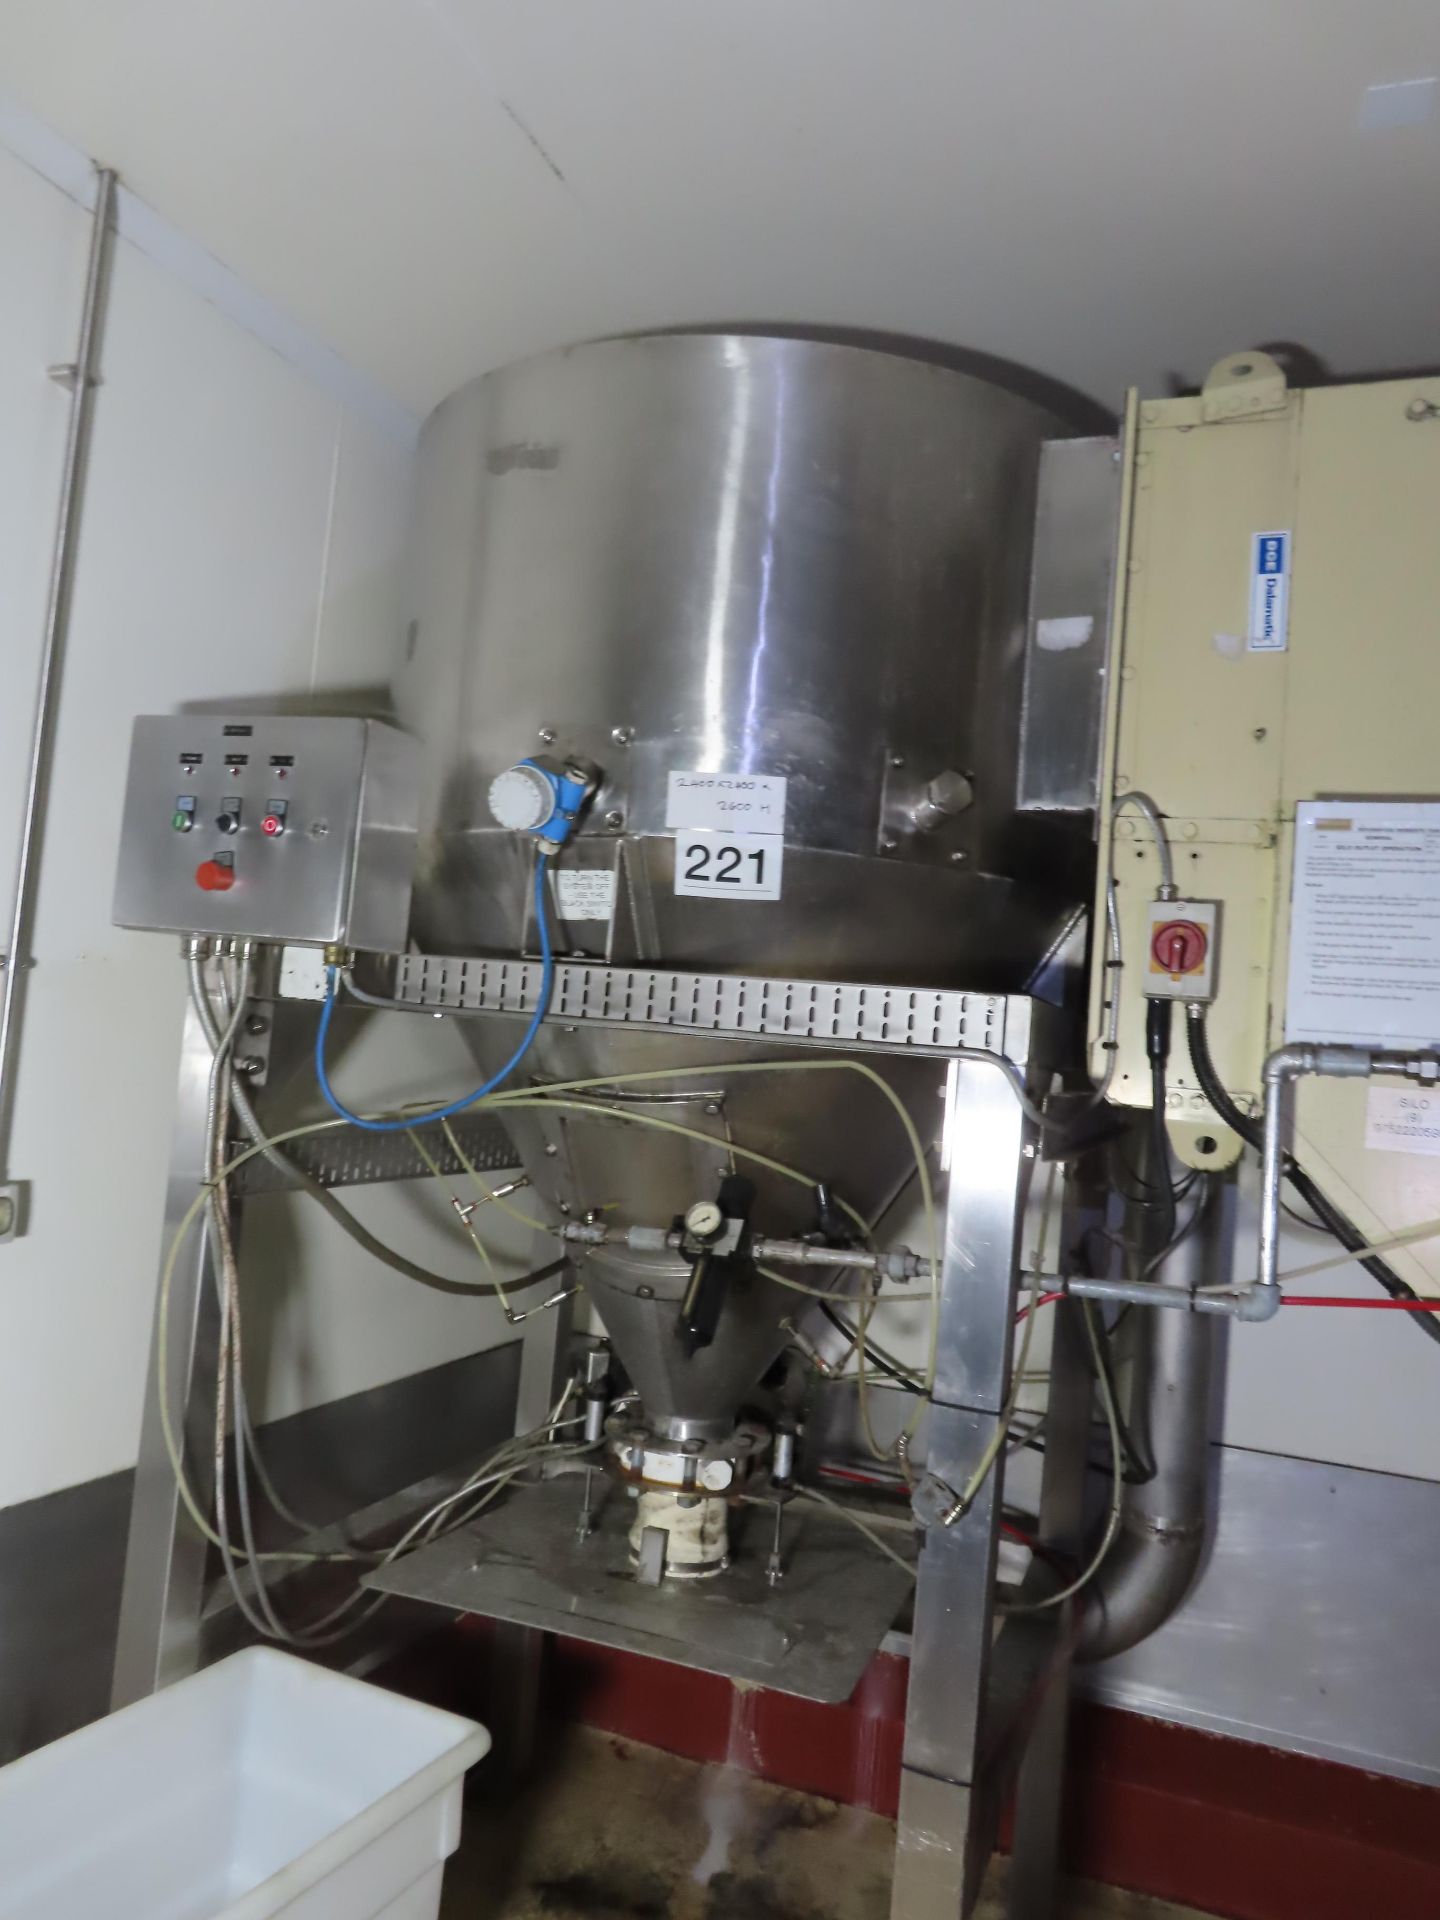 S/S BULK SUGAR DELIVERY SYSTEM. - Image 2 of 3